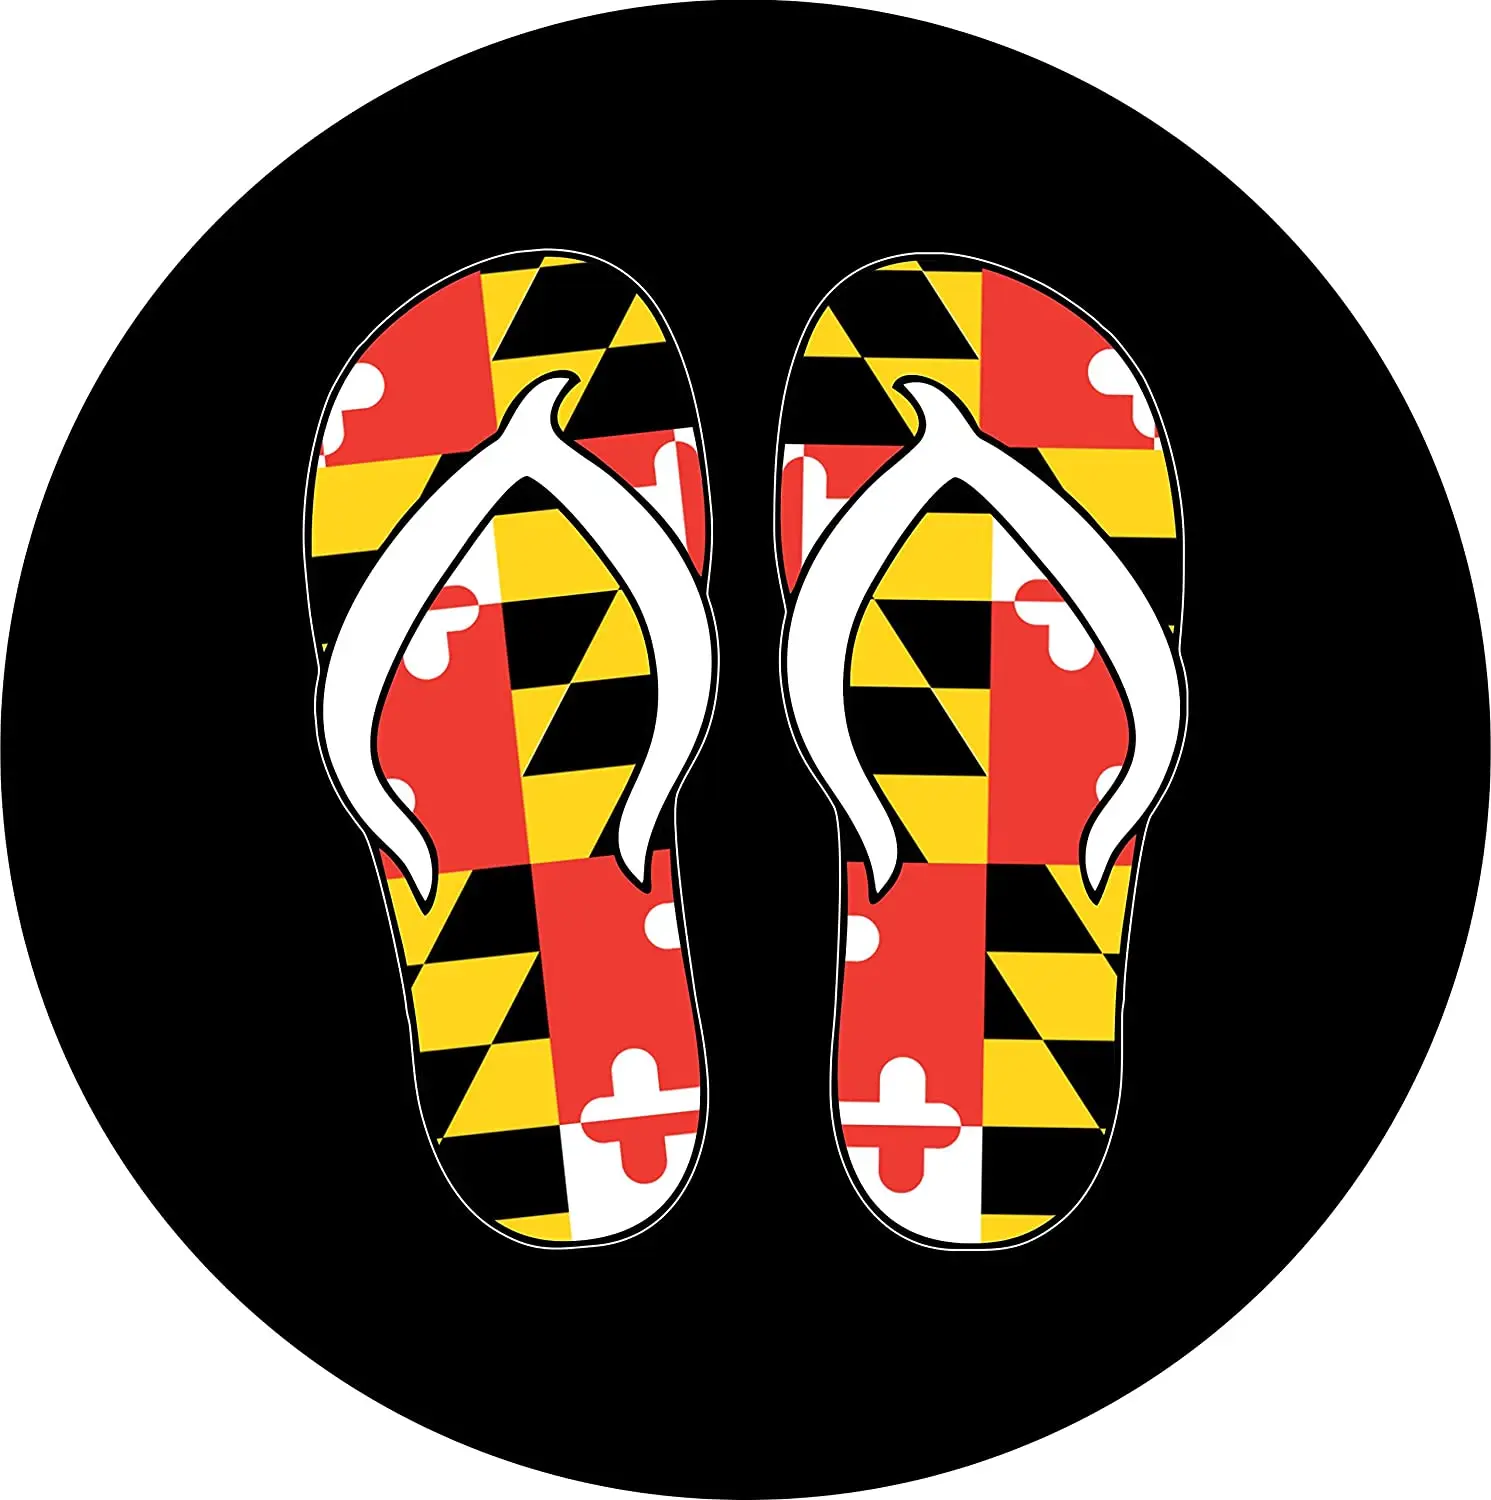 

TIRE COVER CENTRAL Maryland Flip Flops Spare Tire Cover ( Custom Sized to Any Make/modelfor 255/70R18